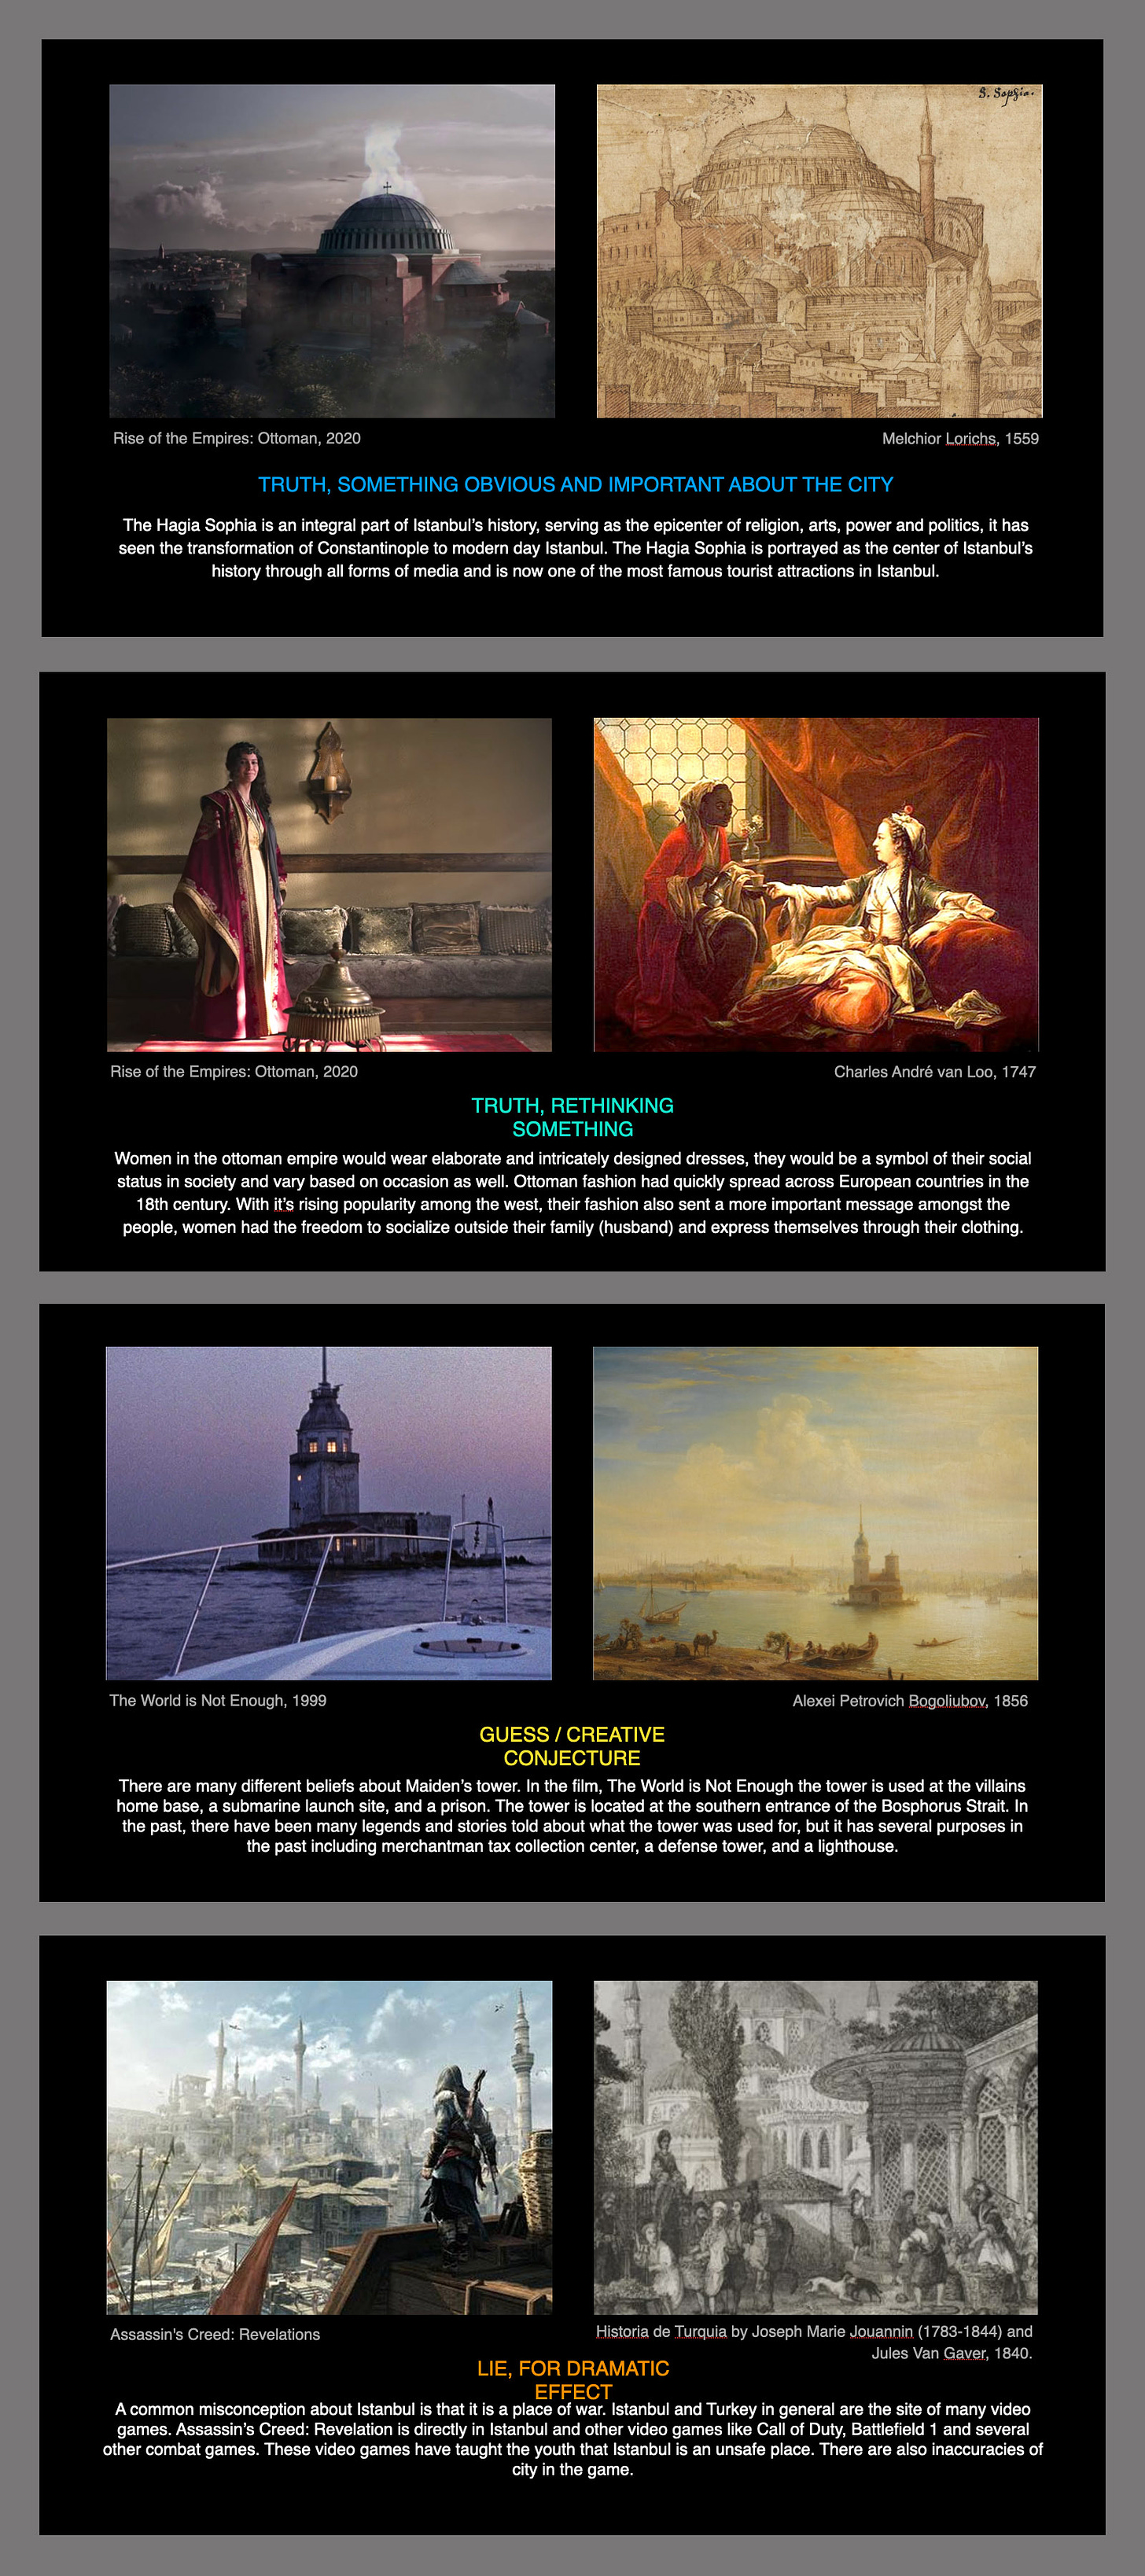 Image of five slides of student work showing their response to "two truths, a guess, and a lie" about Istanbul.